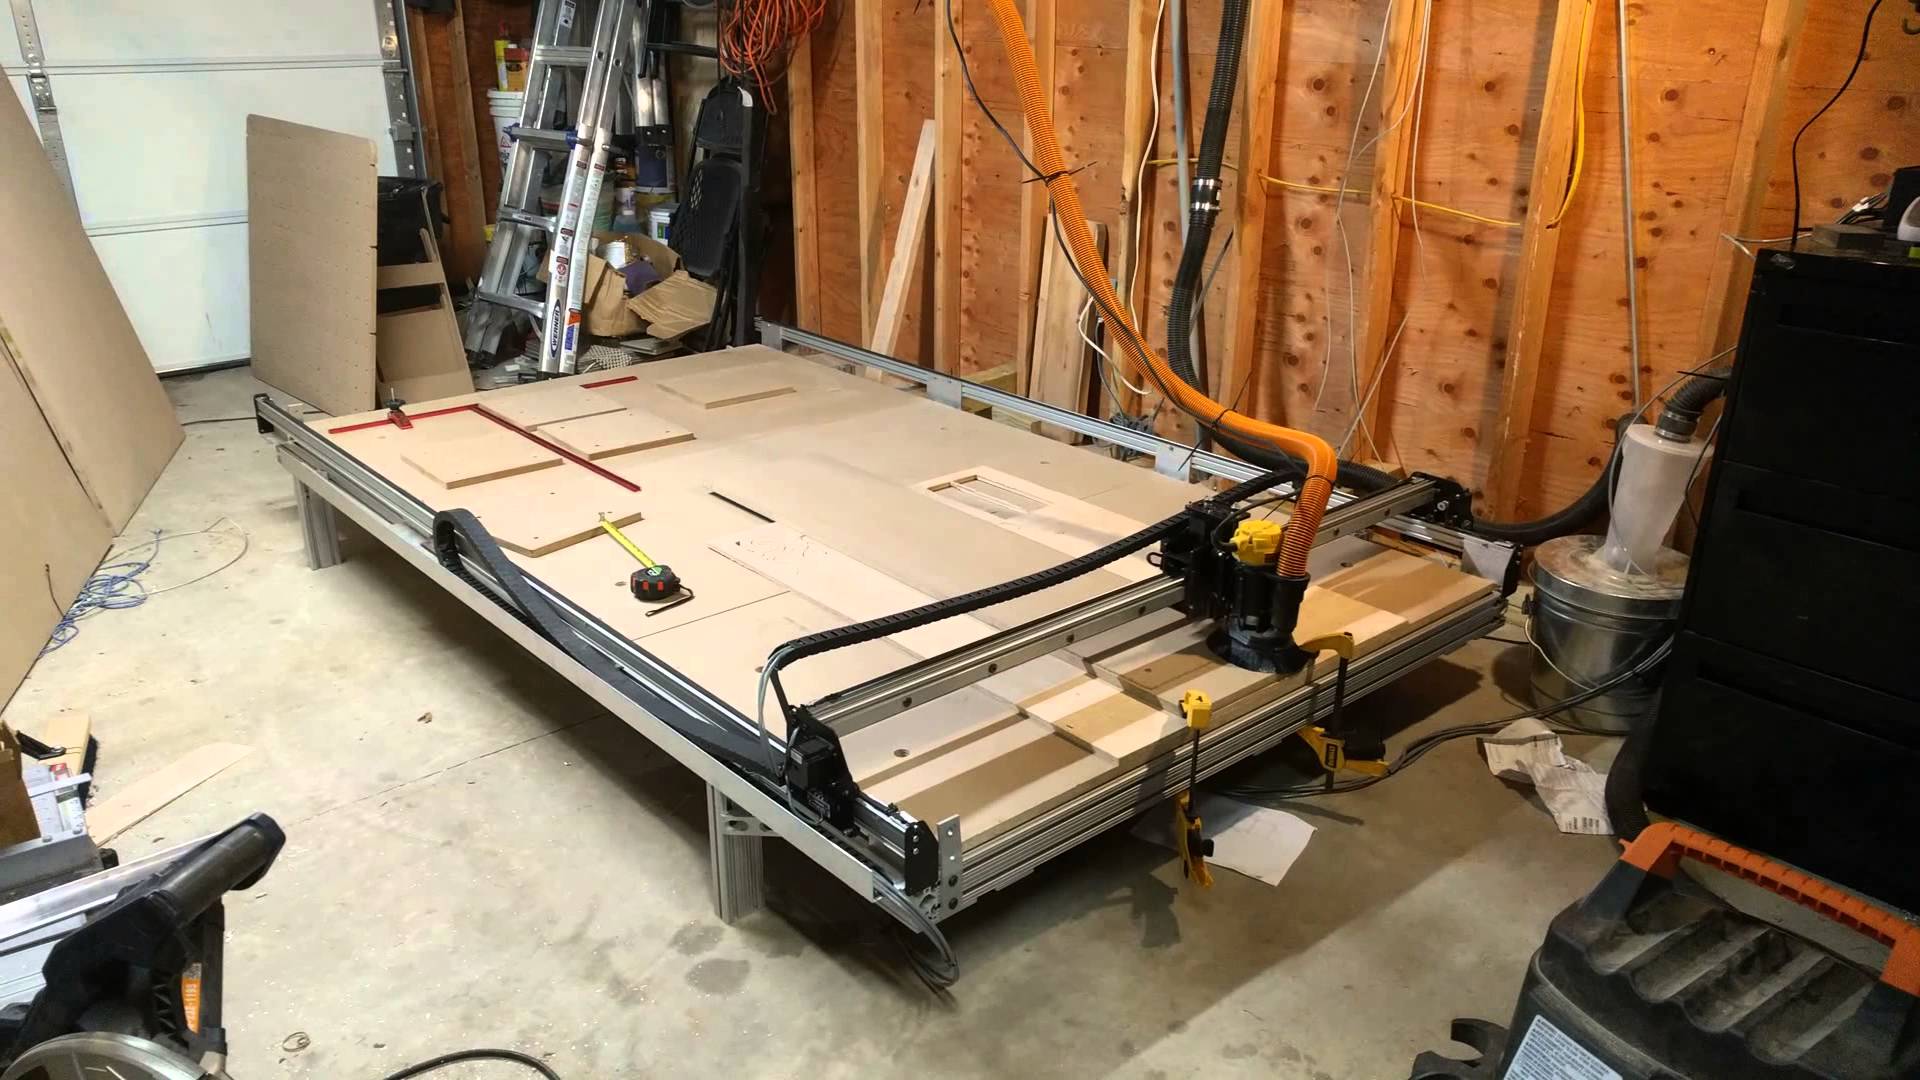 X Carve (monster carve) 4 x 8 cutting area. - YouTube